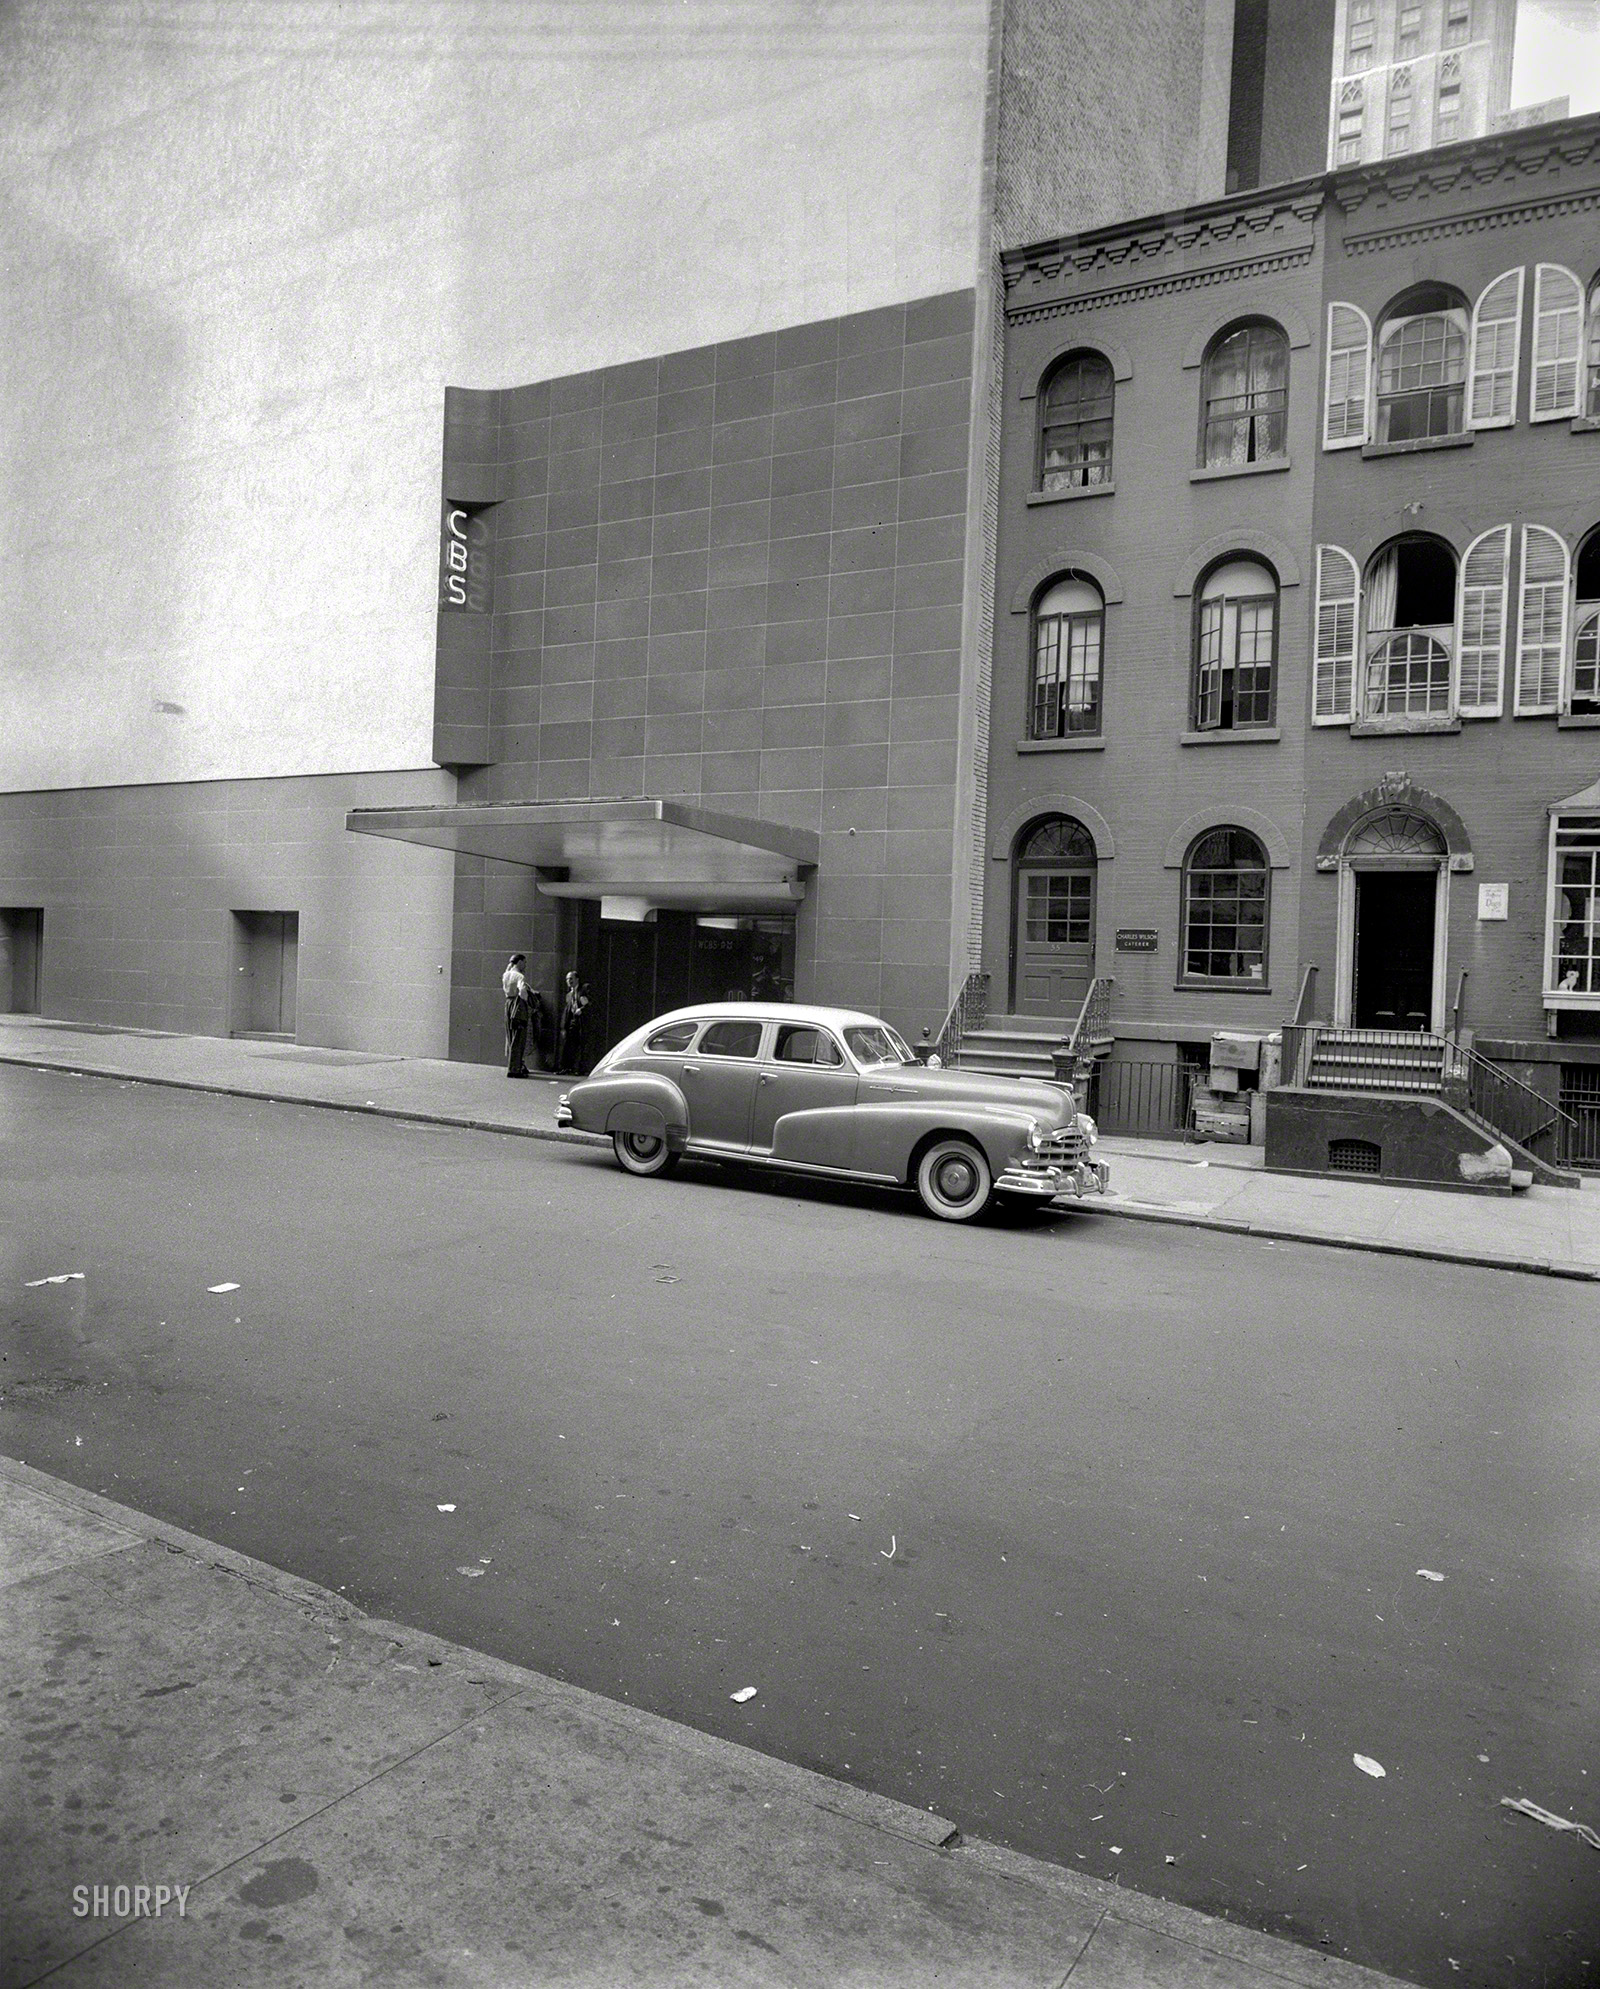 New York circa 1948. "WCBS studios, 49 East 52nd Street." Broadcasting in AM and FM. 4x5 inch acetate negative by John M. Fox. View full size.